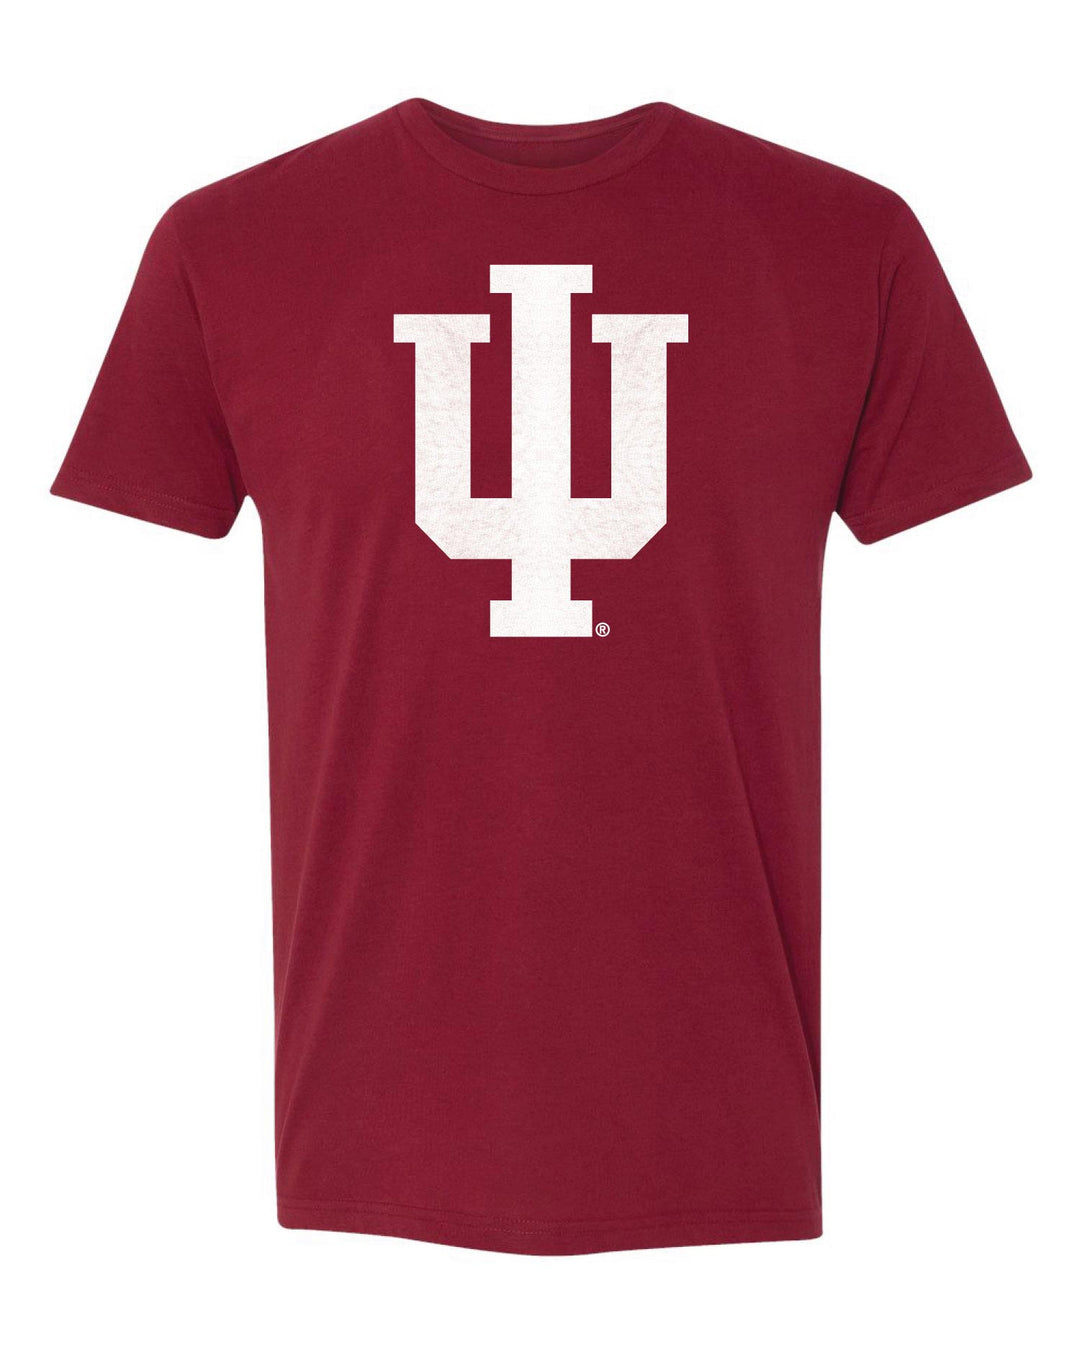 Indiana IU T Shirt Hoosier Apparel in Crimson Red from Nudge Printing